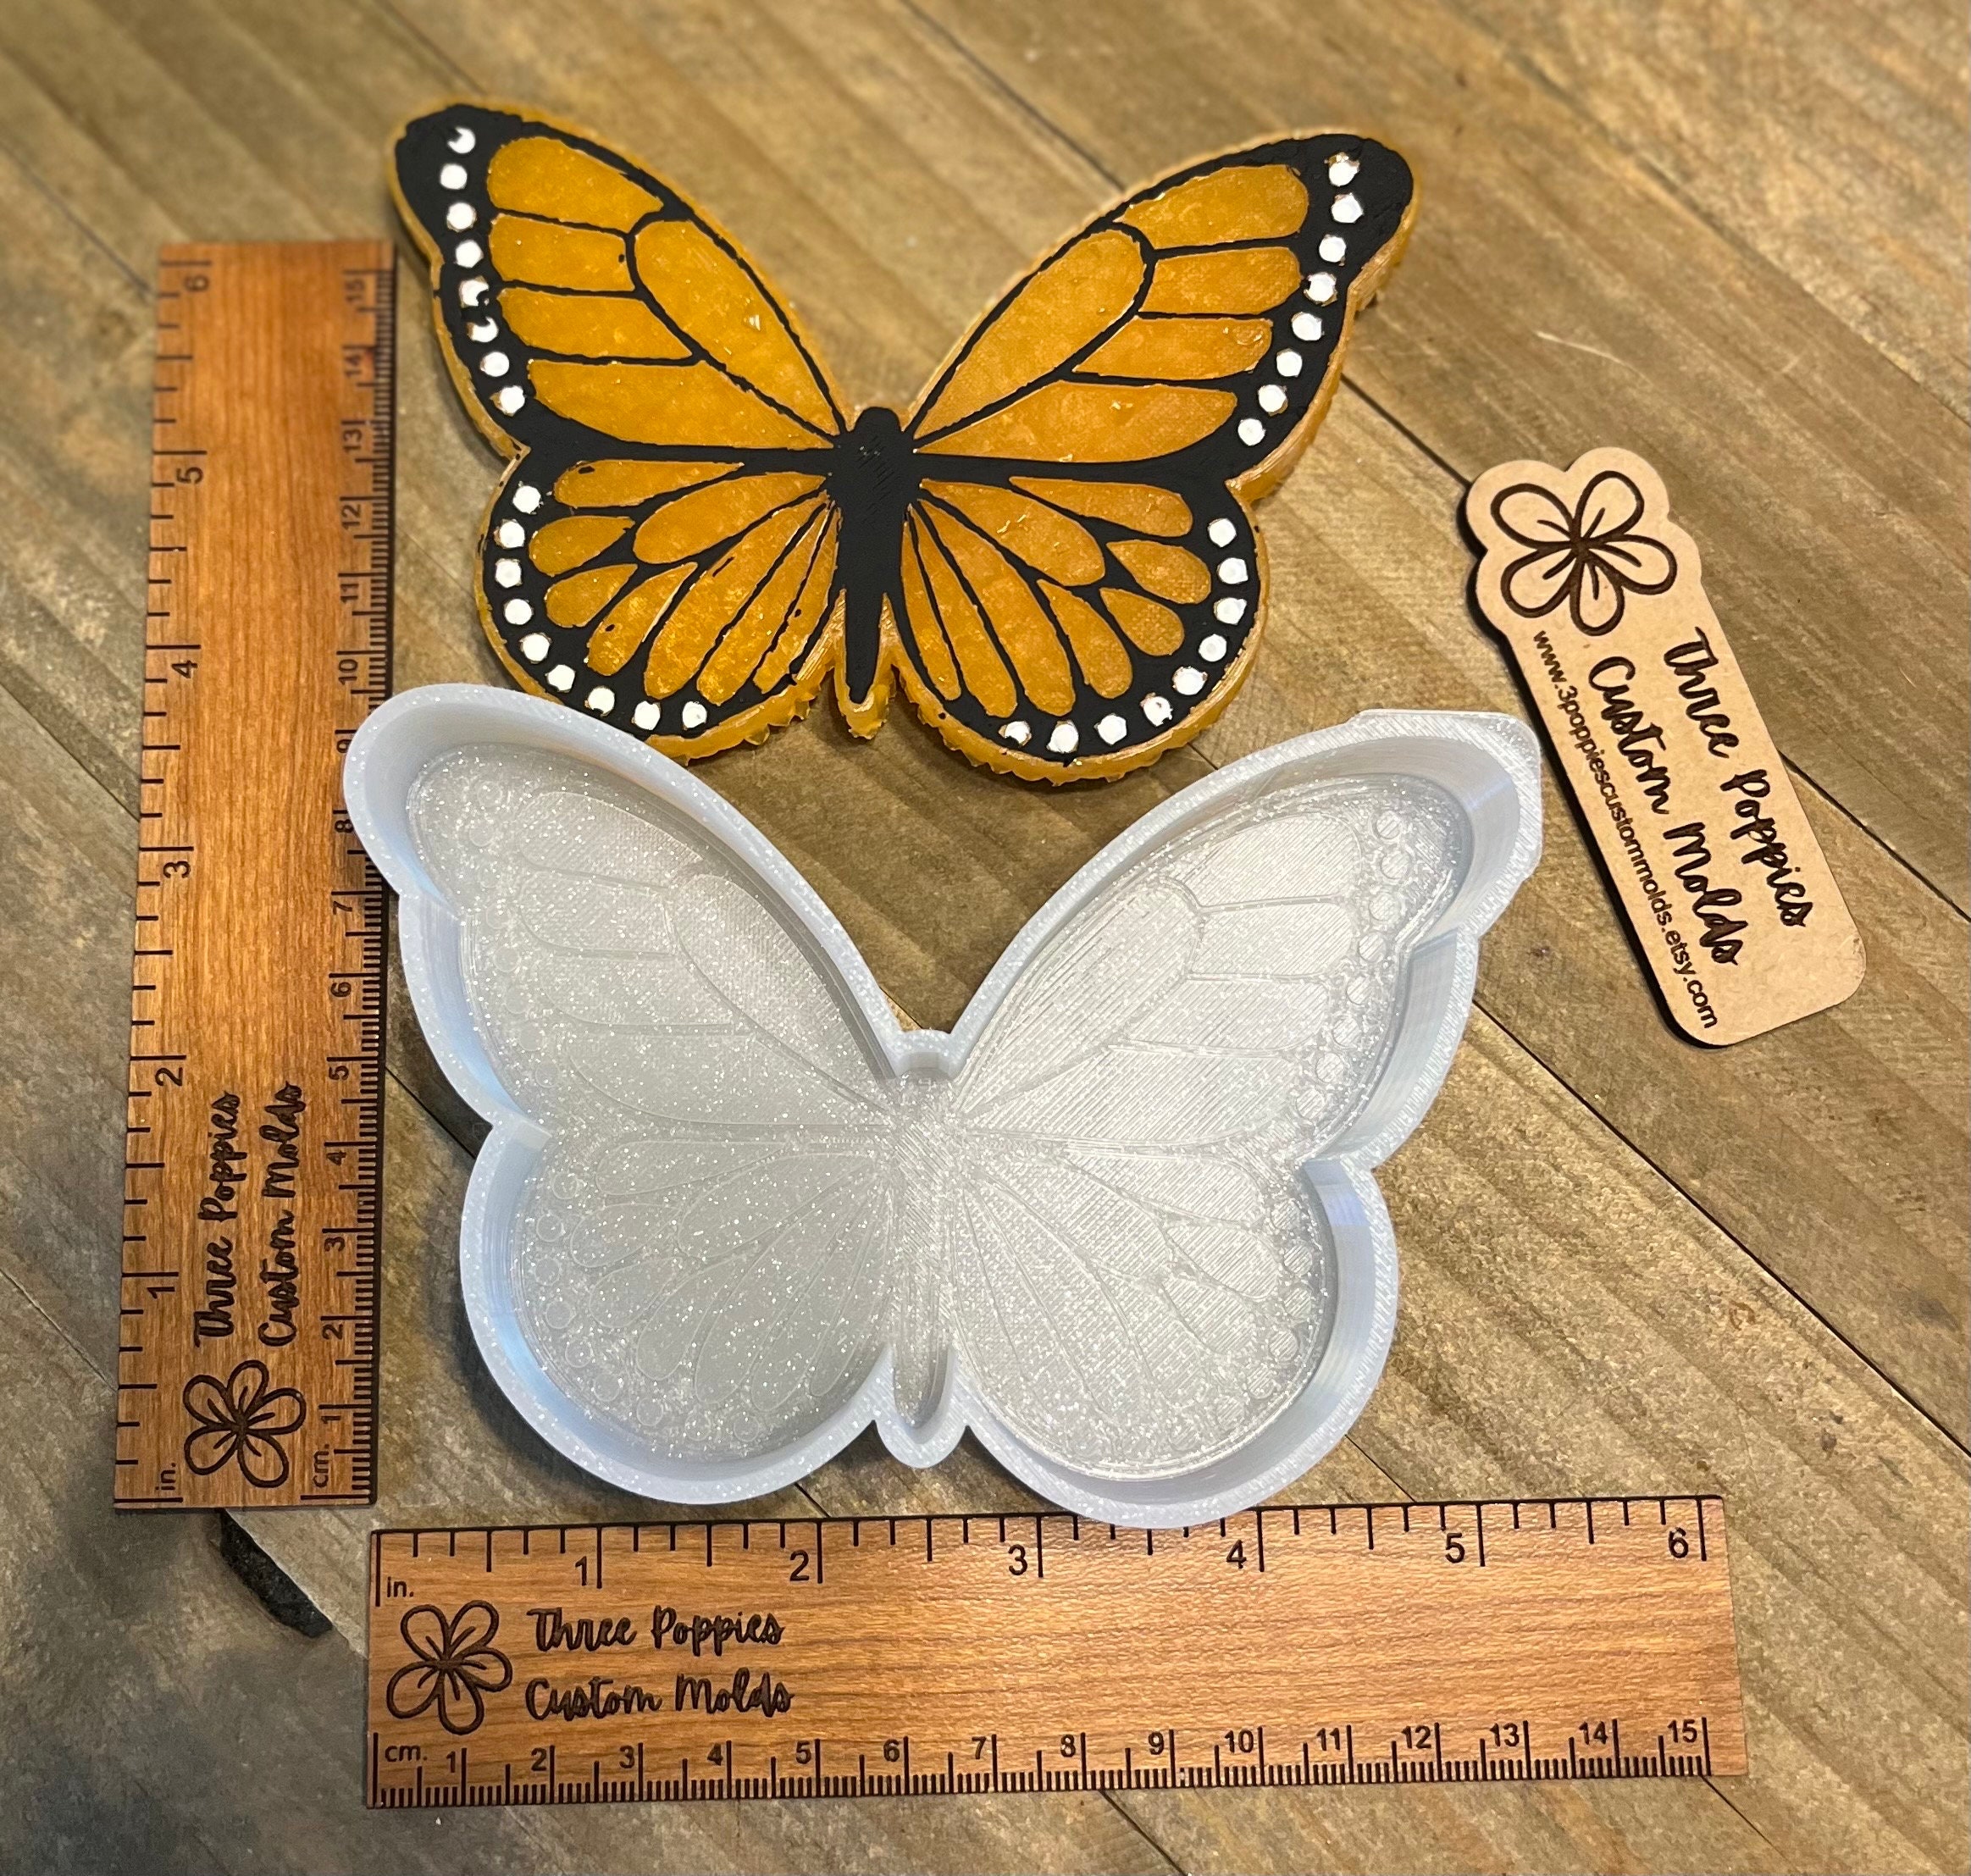 Large butterfly Silicone Mold – Crafty Cake Shop